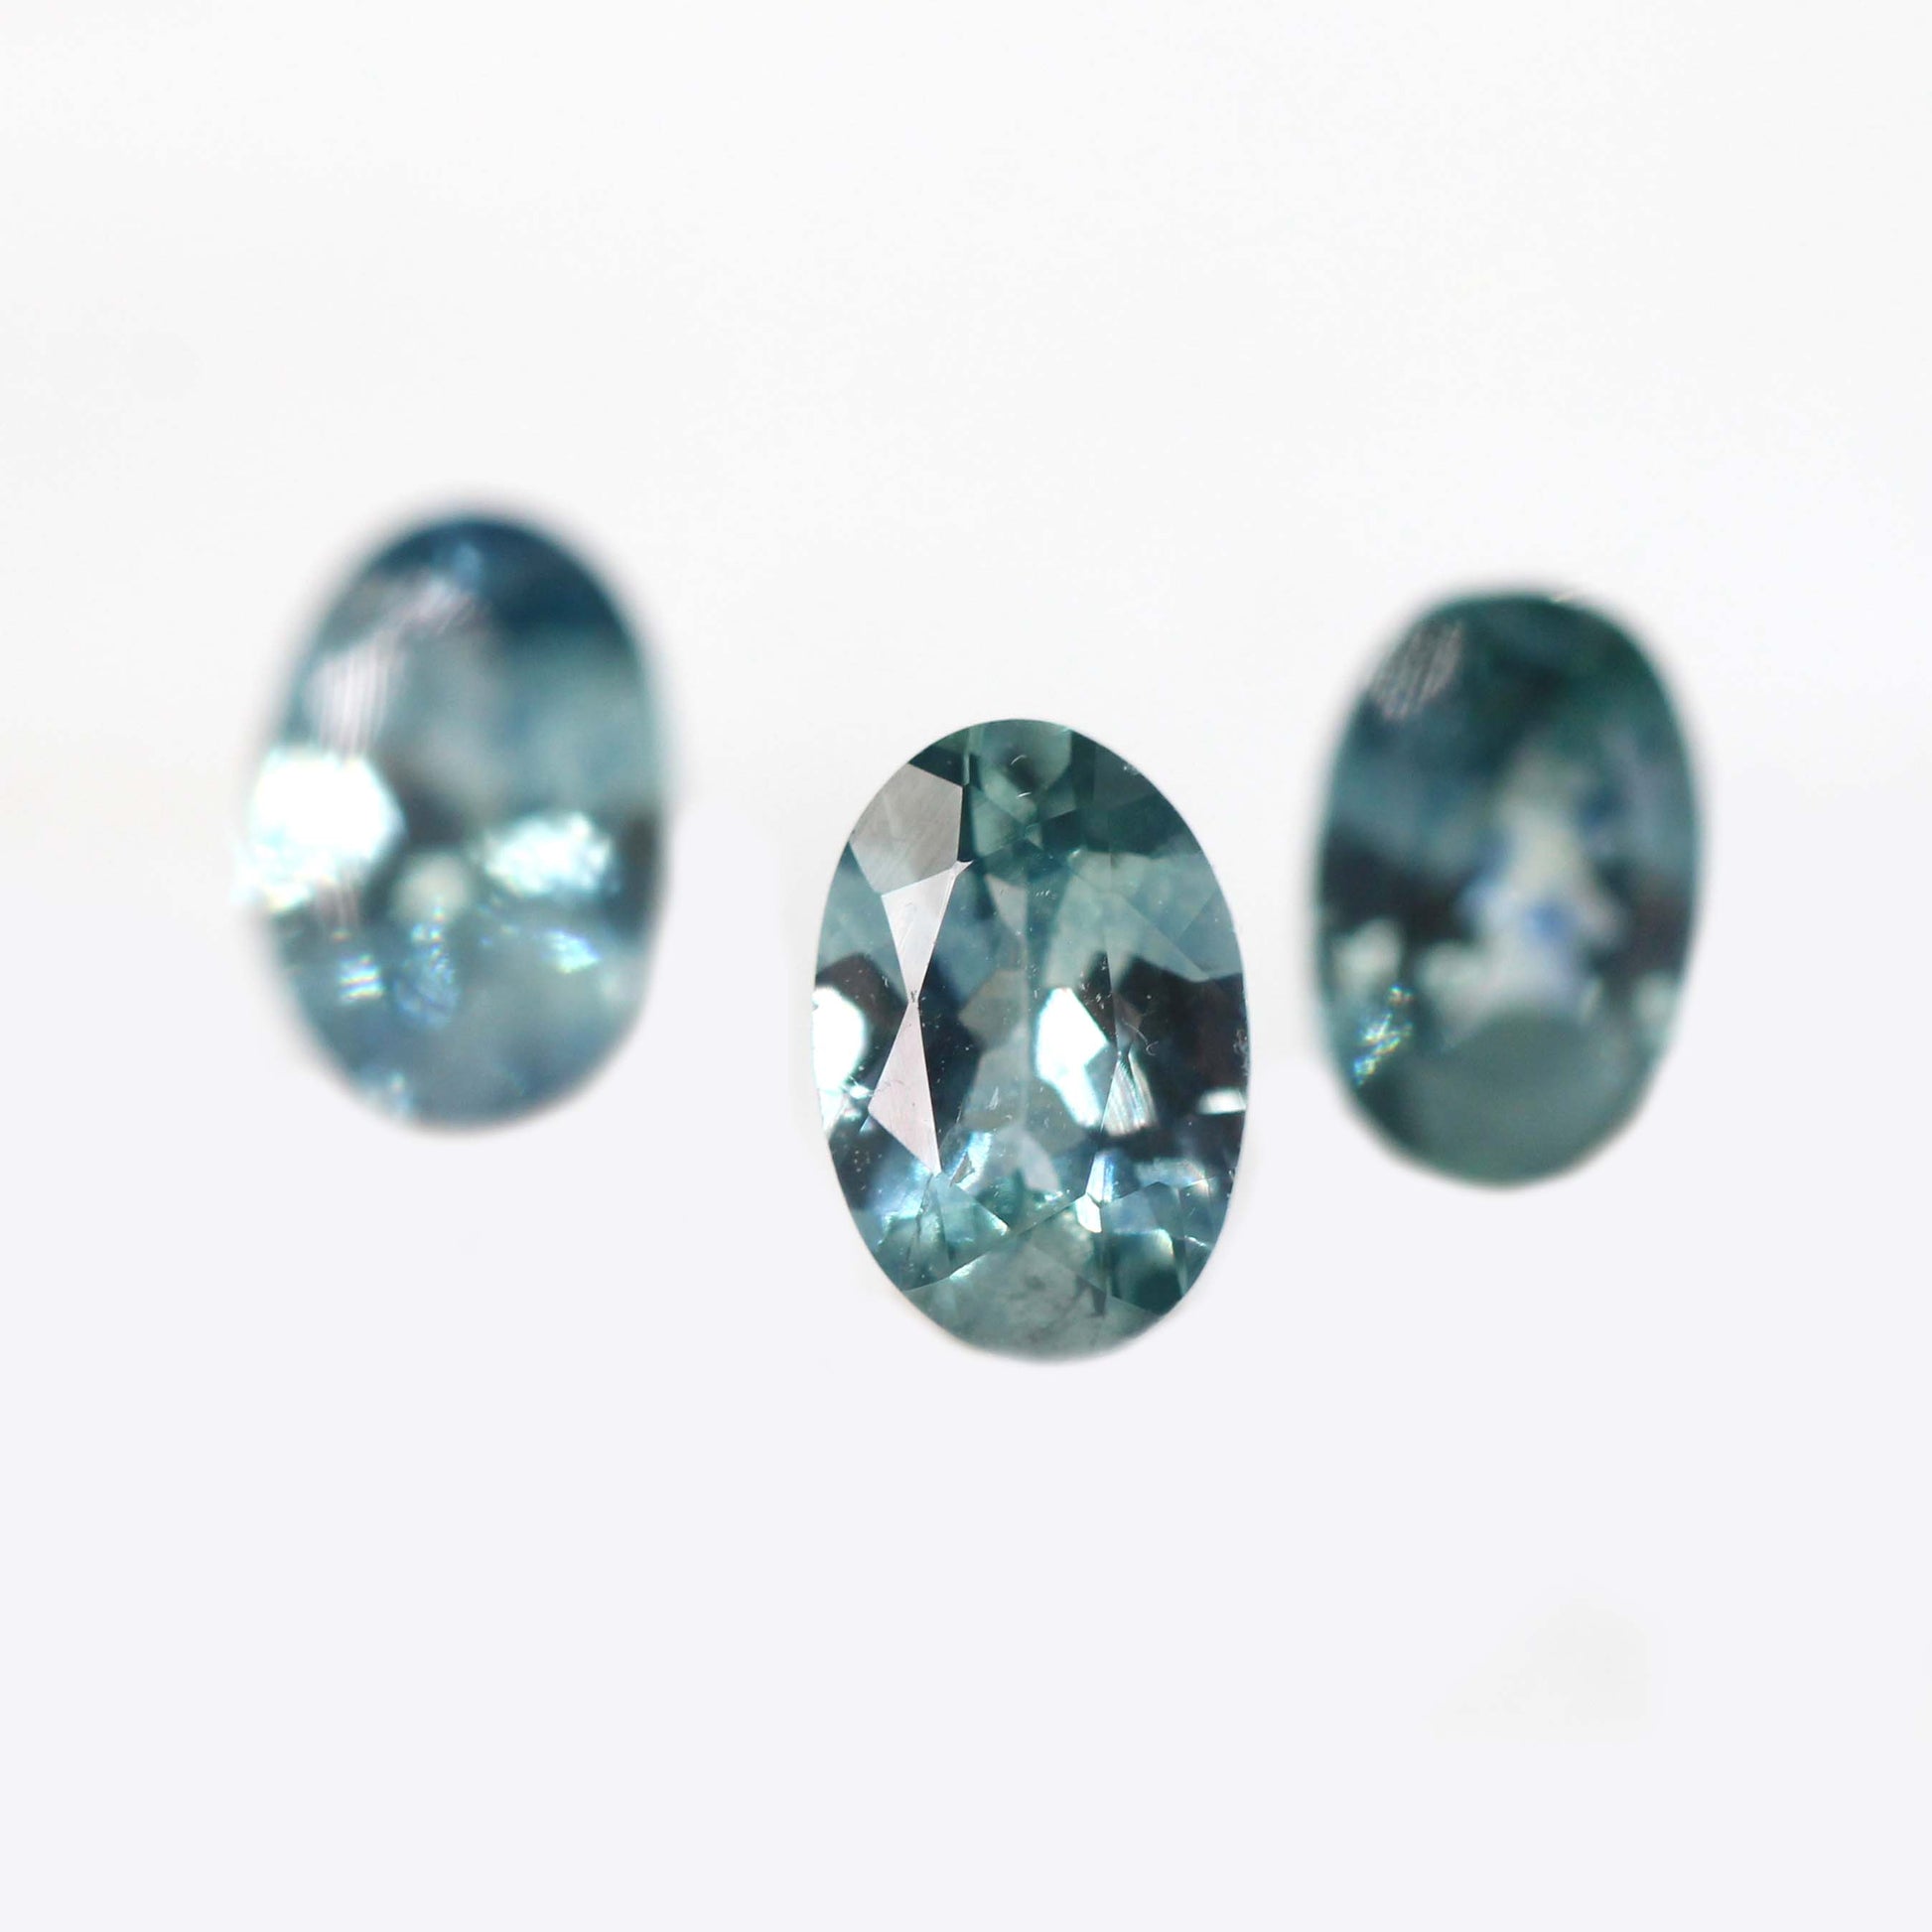 6x4mm Oval Teal Montana Sapphire for Custom Work - Inventory Code TOMS054 - Midwinter Co. Alternative Bridal Rings and Modern Fine Jewelry